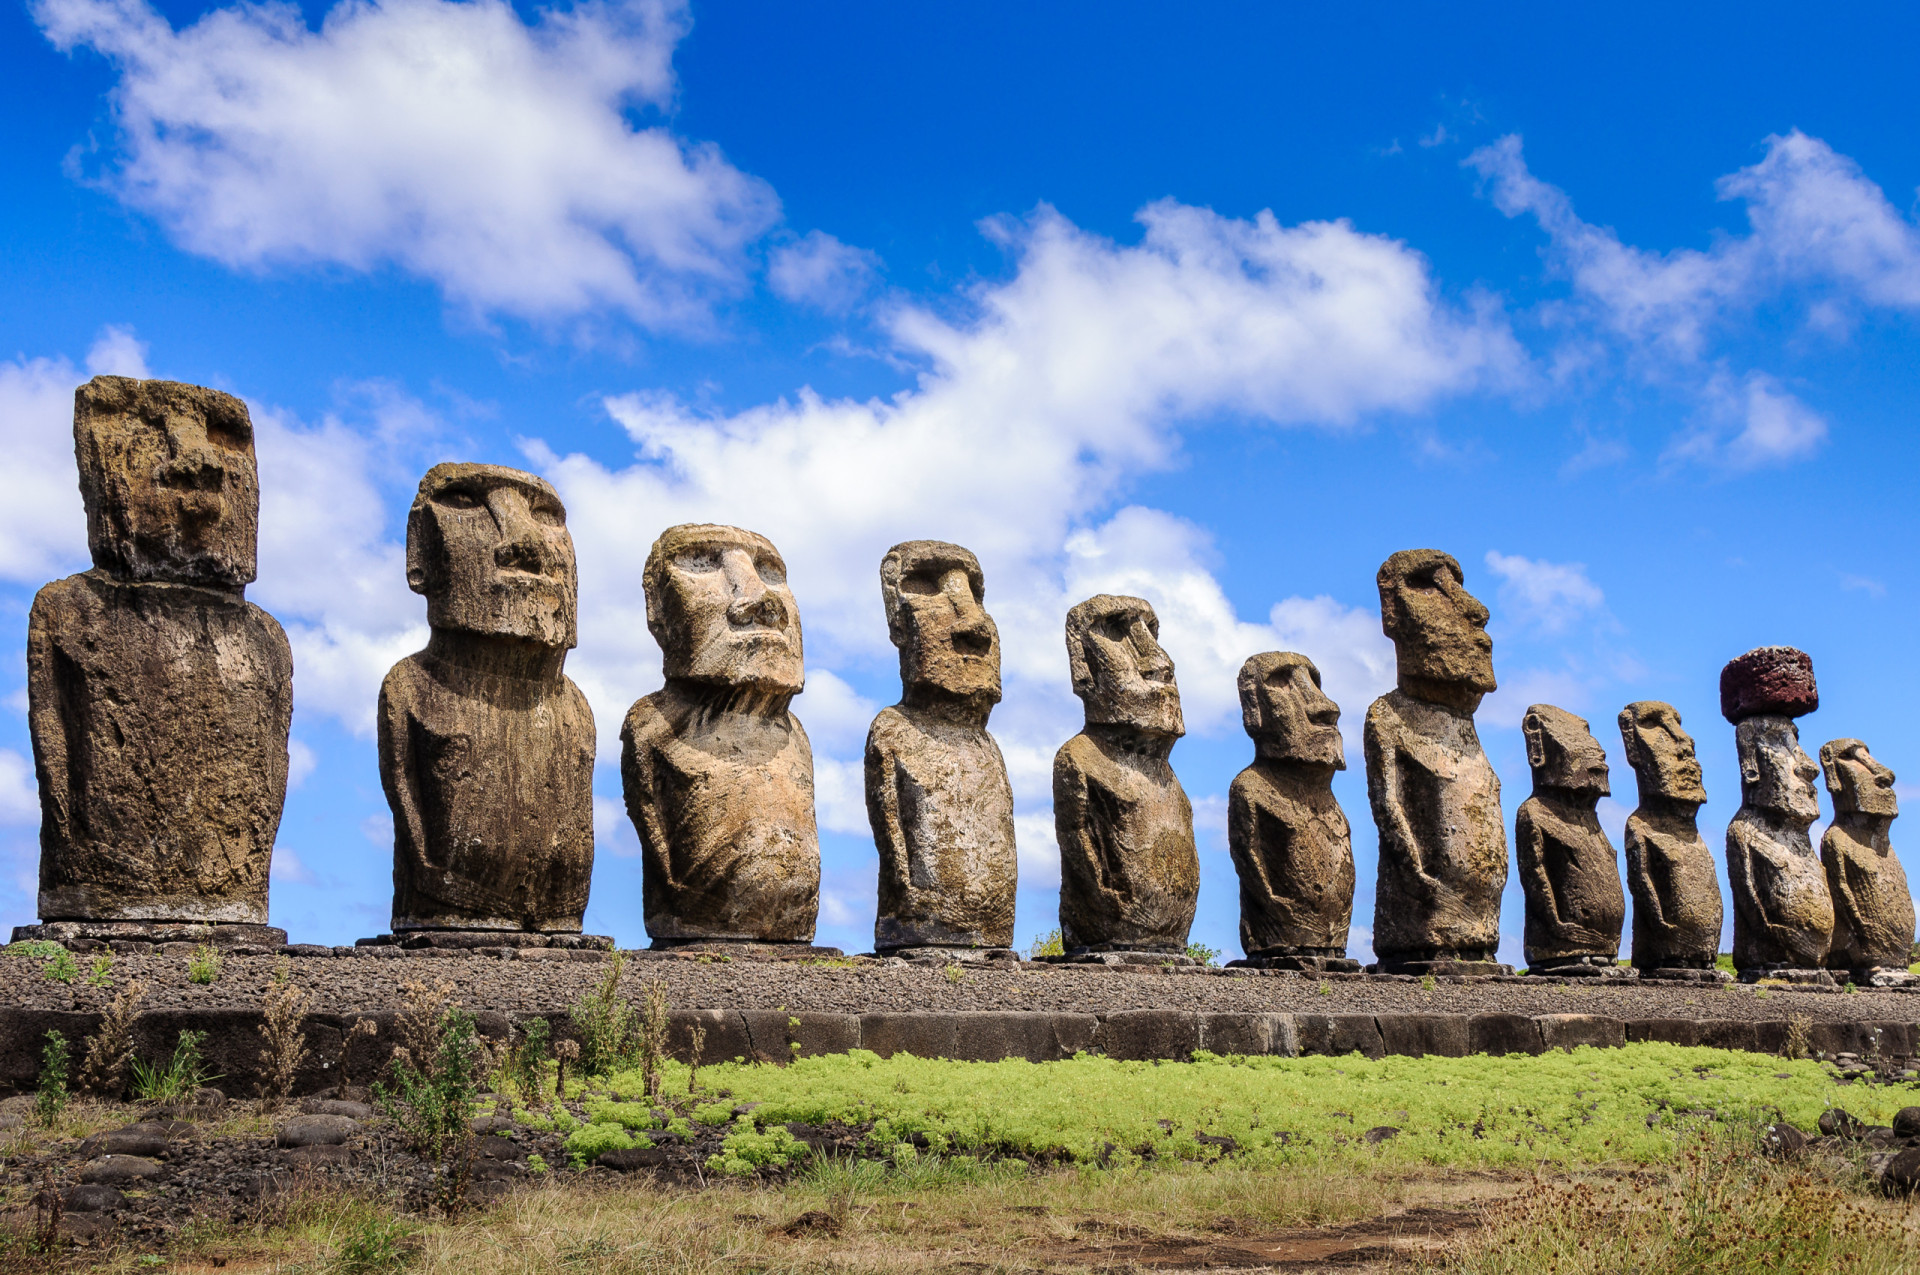 <p>To preserve its mystical Moai statues and archaeological sites, <a href="https://www.starsinsider.com/travel/639758/ancient-locations-shrouded-in-mystery" rel="noopener">Easter Island</a> is limiting visitor numbers. This strategy aims to protect the island's fragile environment and its rich cultural heritage from the impacts of tourism.</p><p>You may also like:<a href="https://www.starsinsider.com/n/387790?utm_source=msn.com&utm_medium=display&utm_campaign=referral_description&utm_content=646906en-us"> Adorable images of a royal sisterly bond as Princess Beatrice turns 35</a></p>